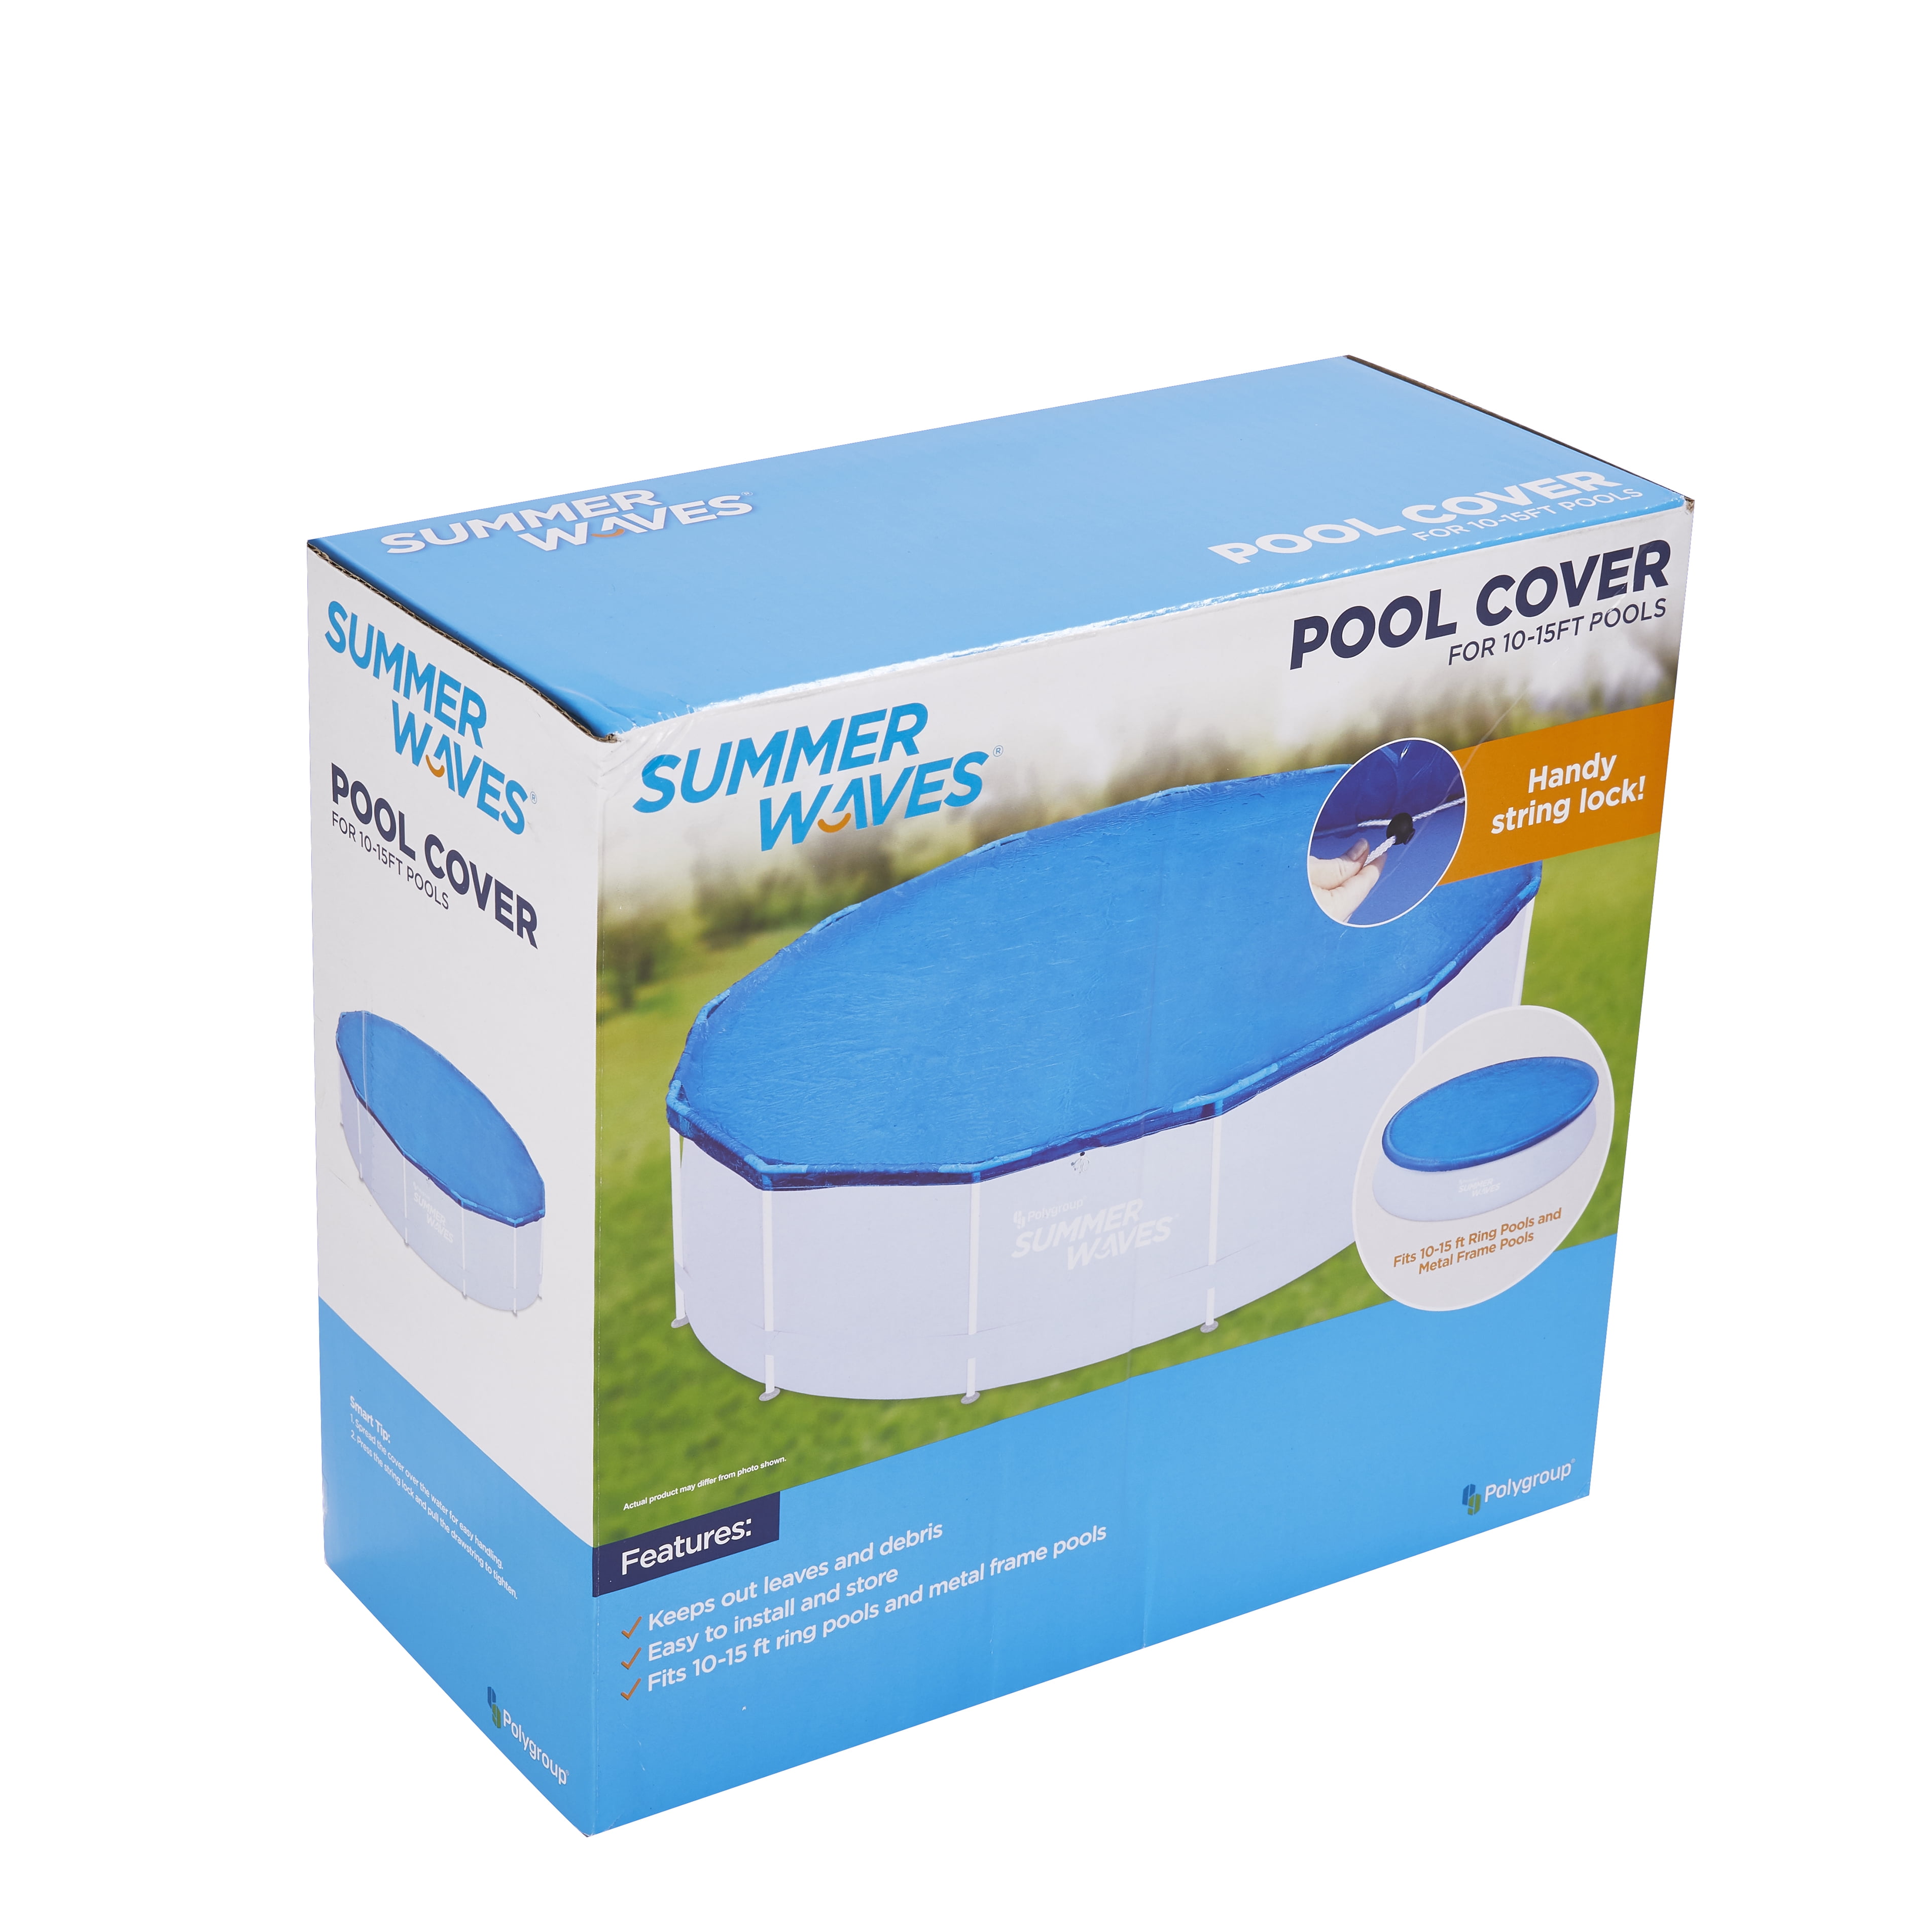 Summer Waves 13 Quick Set Ring Pool Cover.